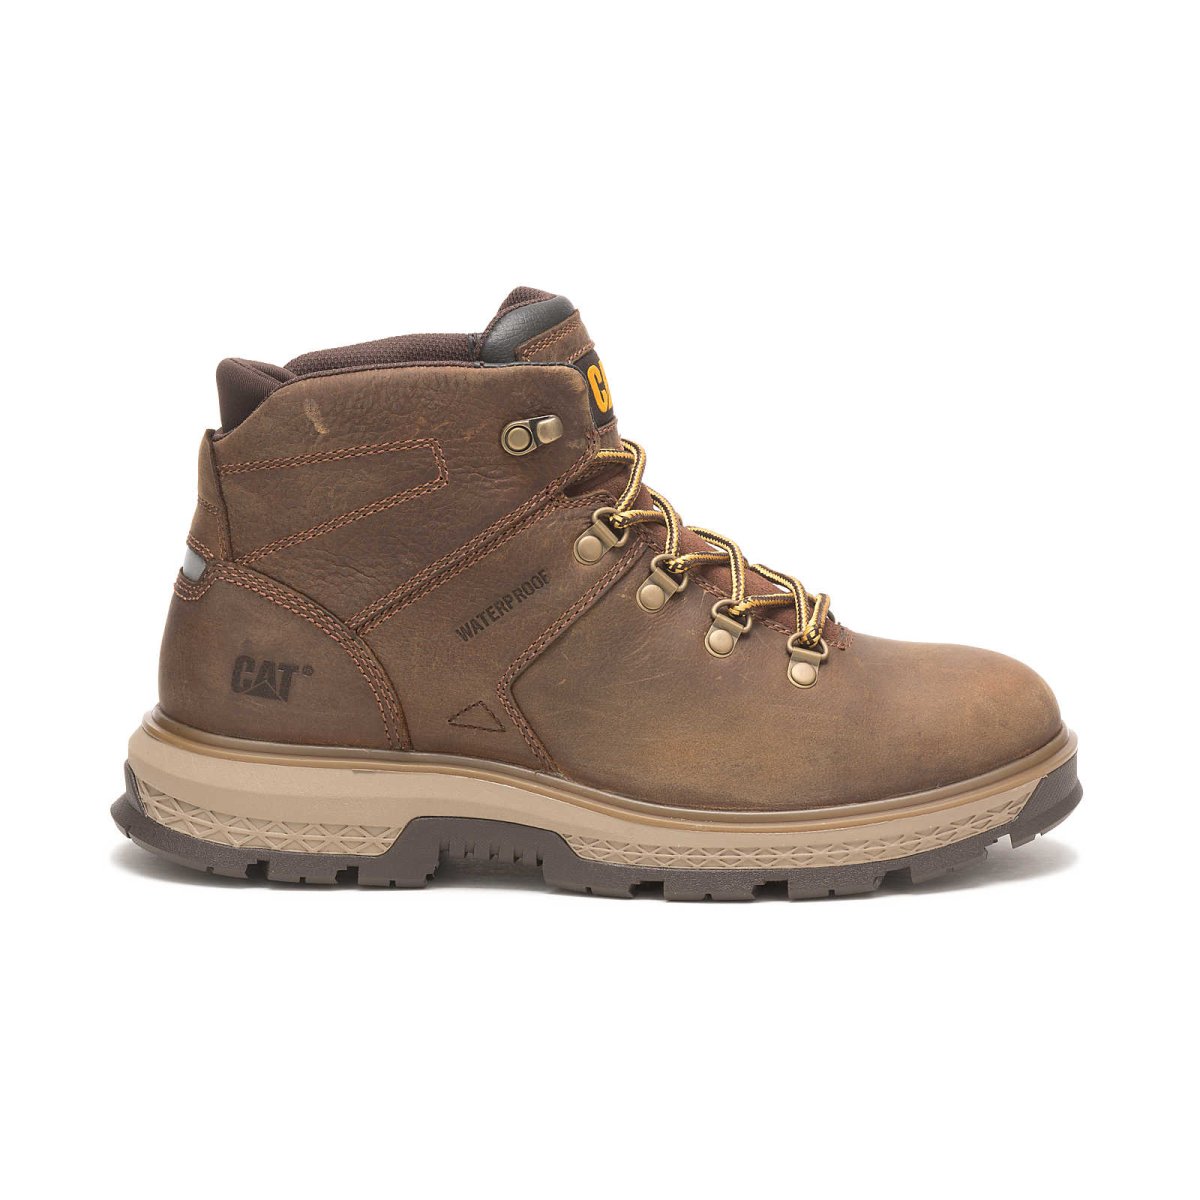 CATERPILLAR EXPOSITION HIKER WATERPROOF SOFT TOE MEN'S WORK BOOT (P51061) IN PYRAMID - TLW Shoes